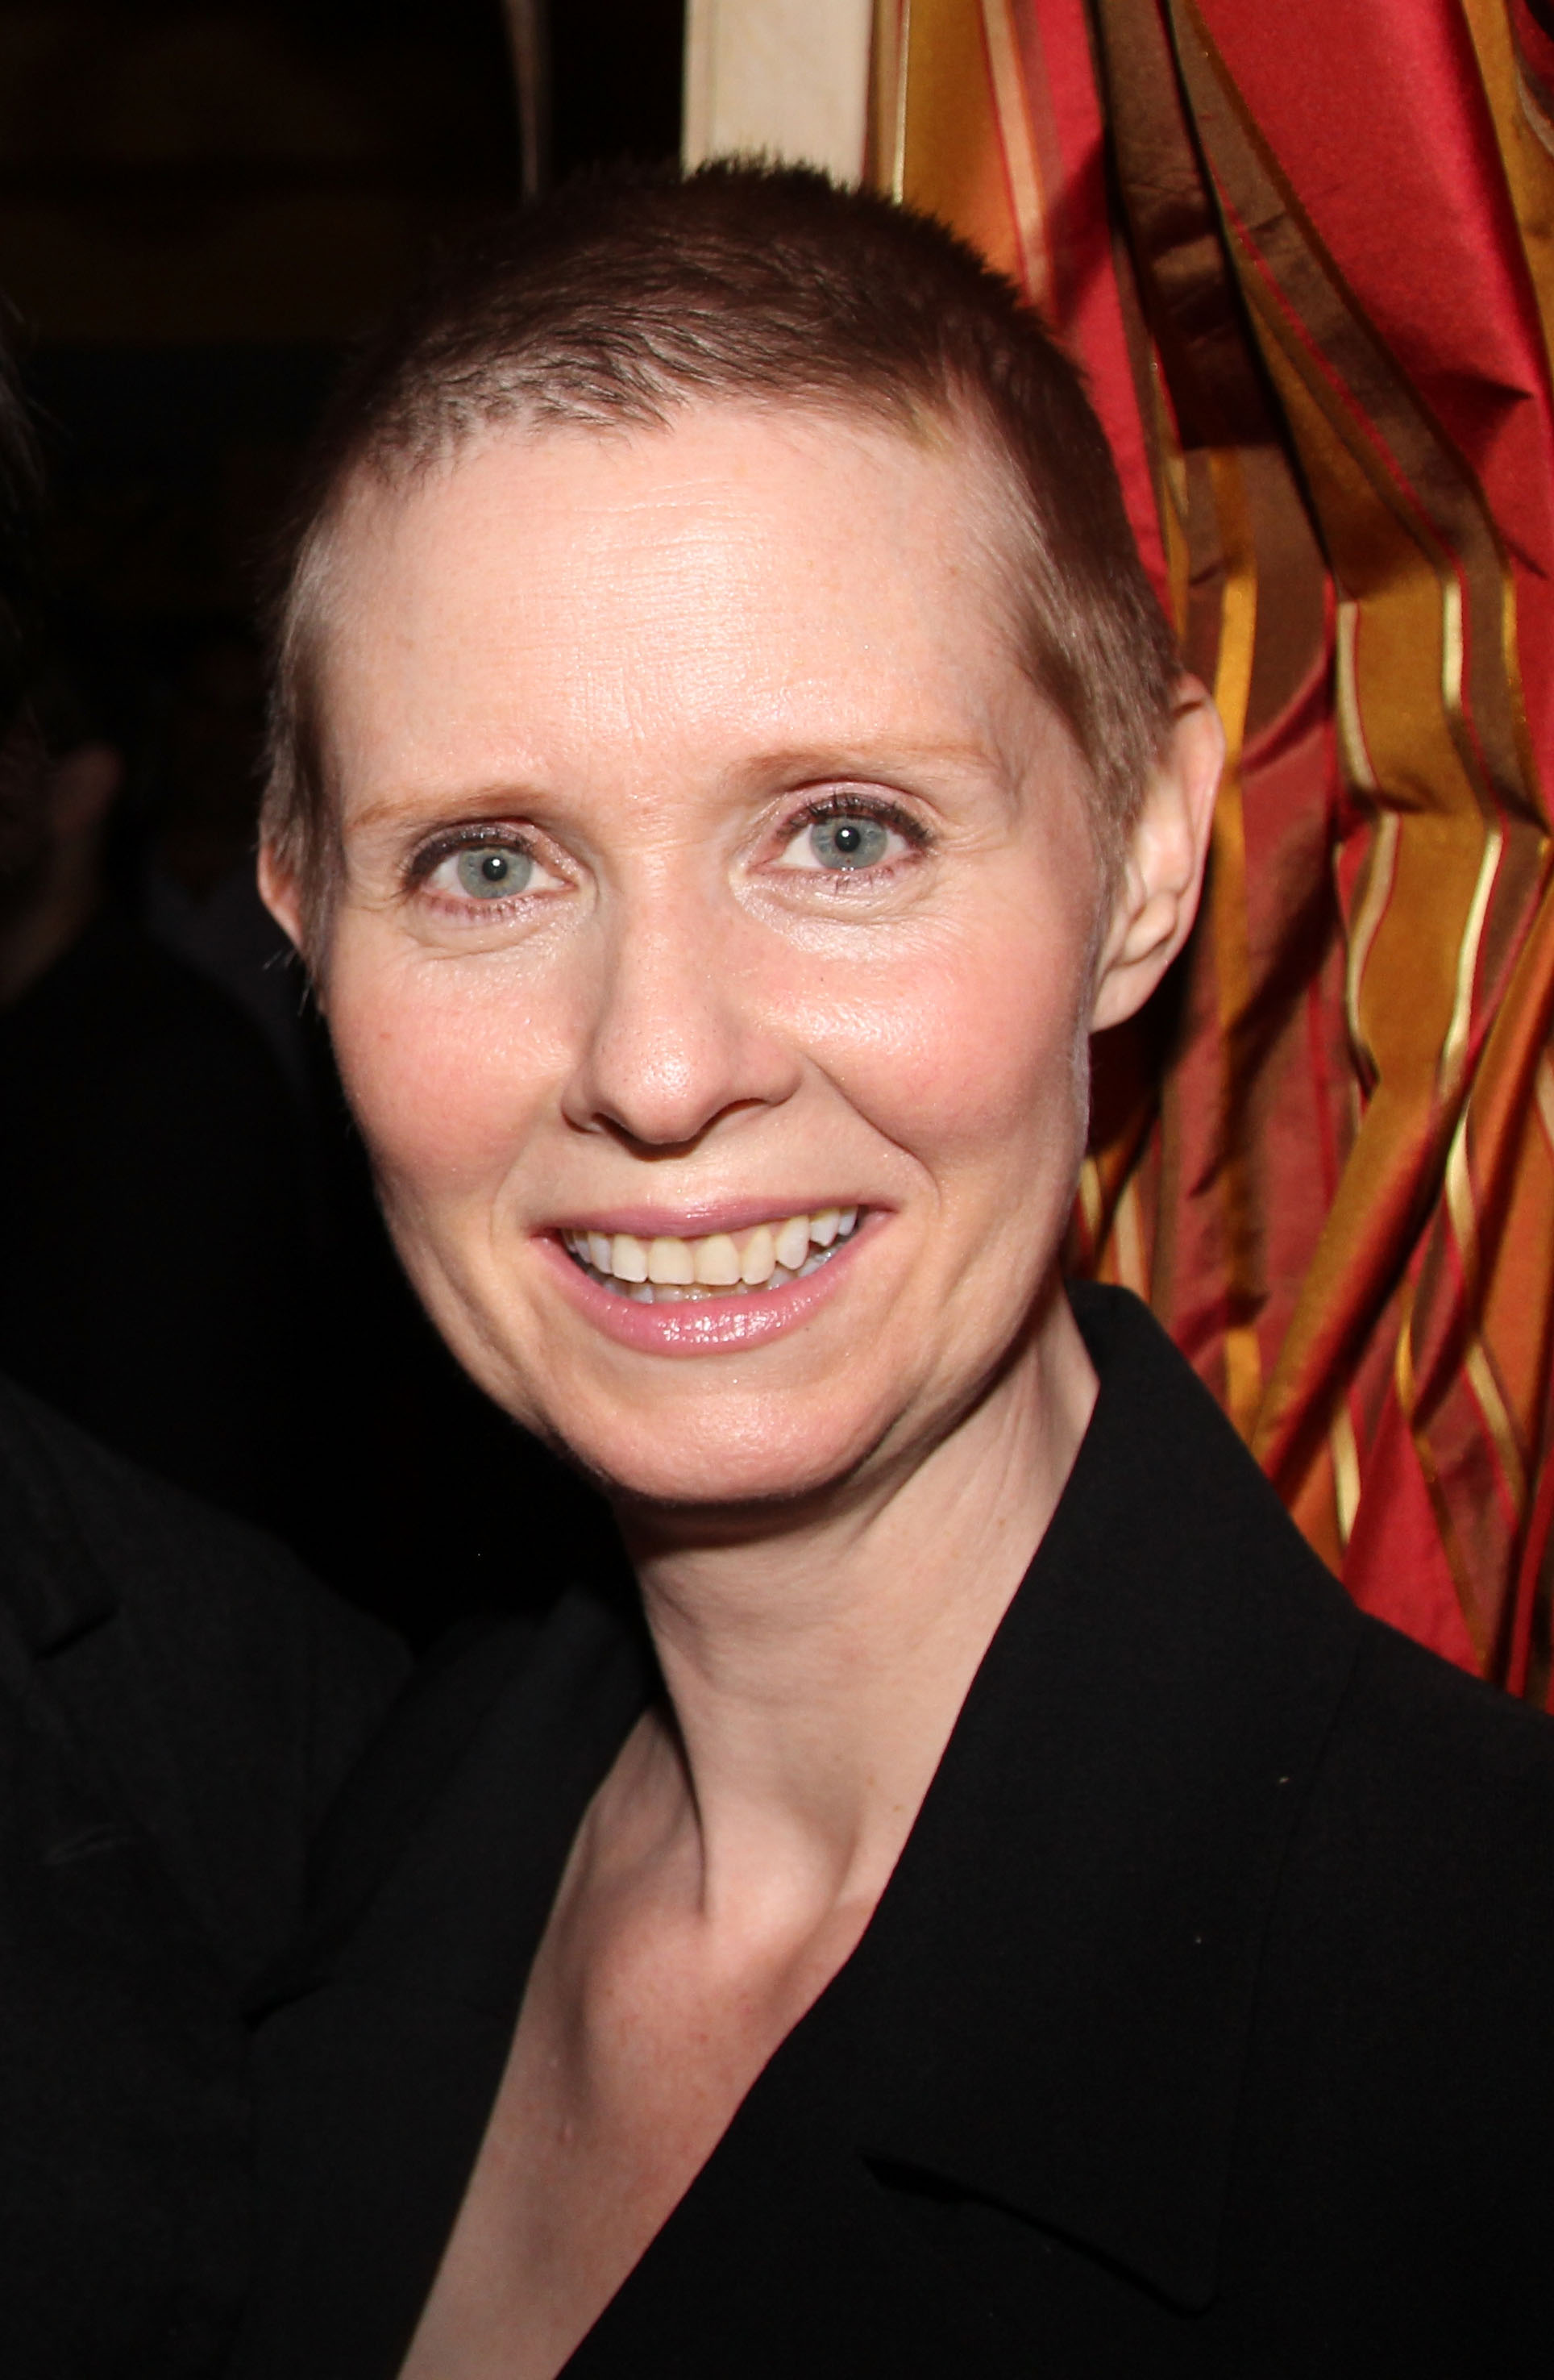 Cynthia Nixon on May 7, 2012, in New York City. | Source: Getty Images